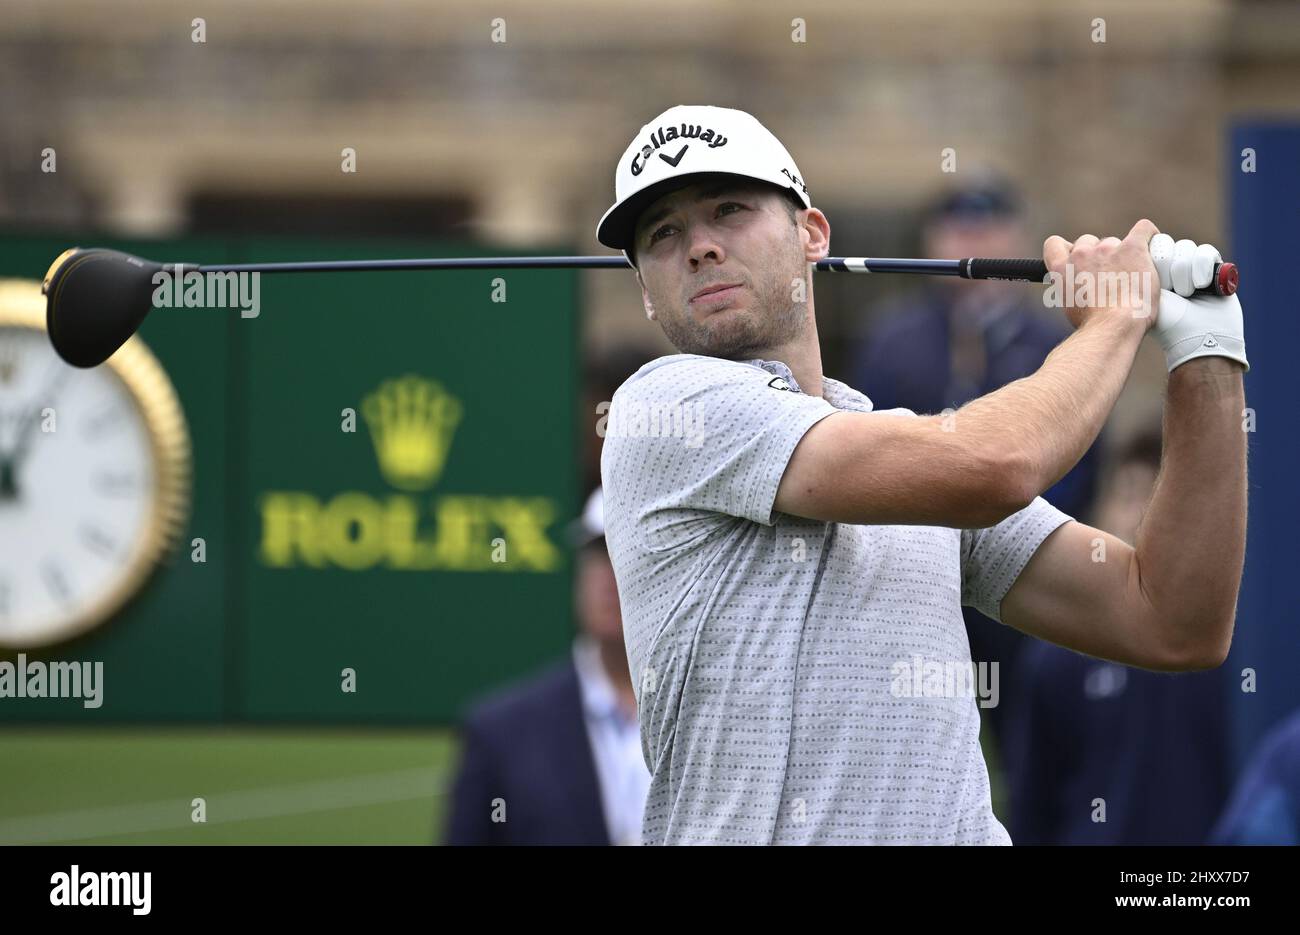 Ponte Vedra Beach, United States. 14th Mar, 2022. Sam Burns of the United States tees off on the 1st hole in the final round of the 2022 Players PGA Championship on the Stadium Course at TPC Sawgrass in Ponte Vedra Beach, Florida on Monday, March 14, 2022. The golf tournament has been extended one day due to weather delays. Photo by Joe Marino/UPI Credit: UPI/Alamy Live News Stock Photo